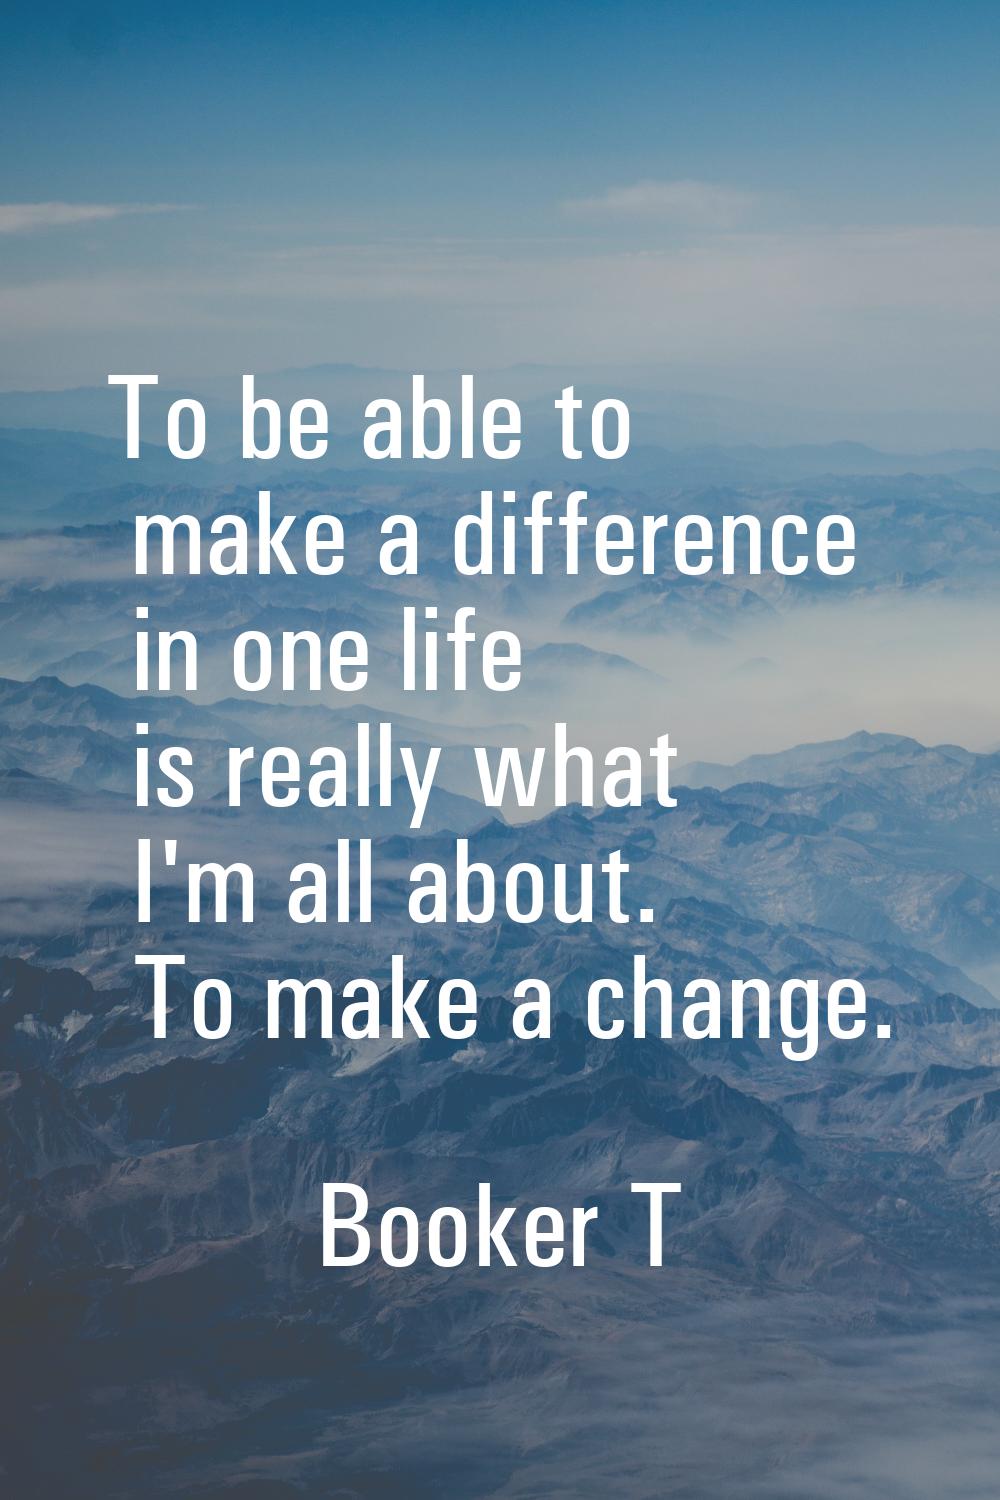 To be able to make a difference in one life is really what I'm all about. To make a change.